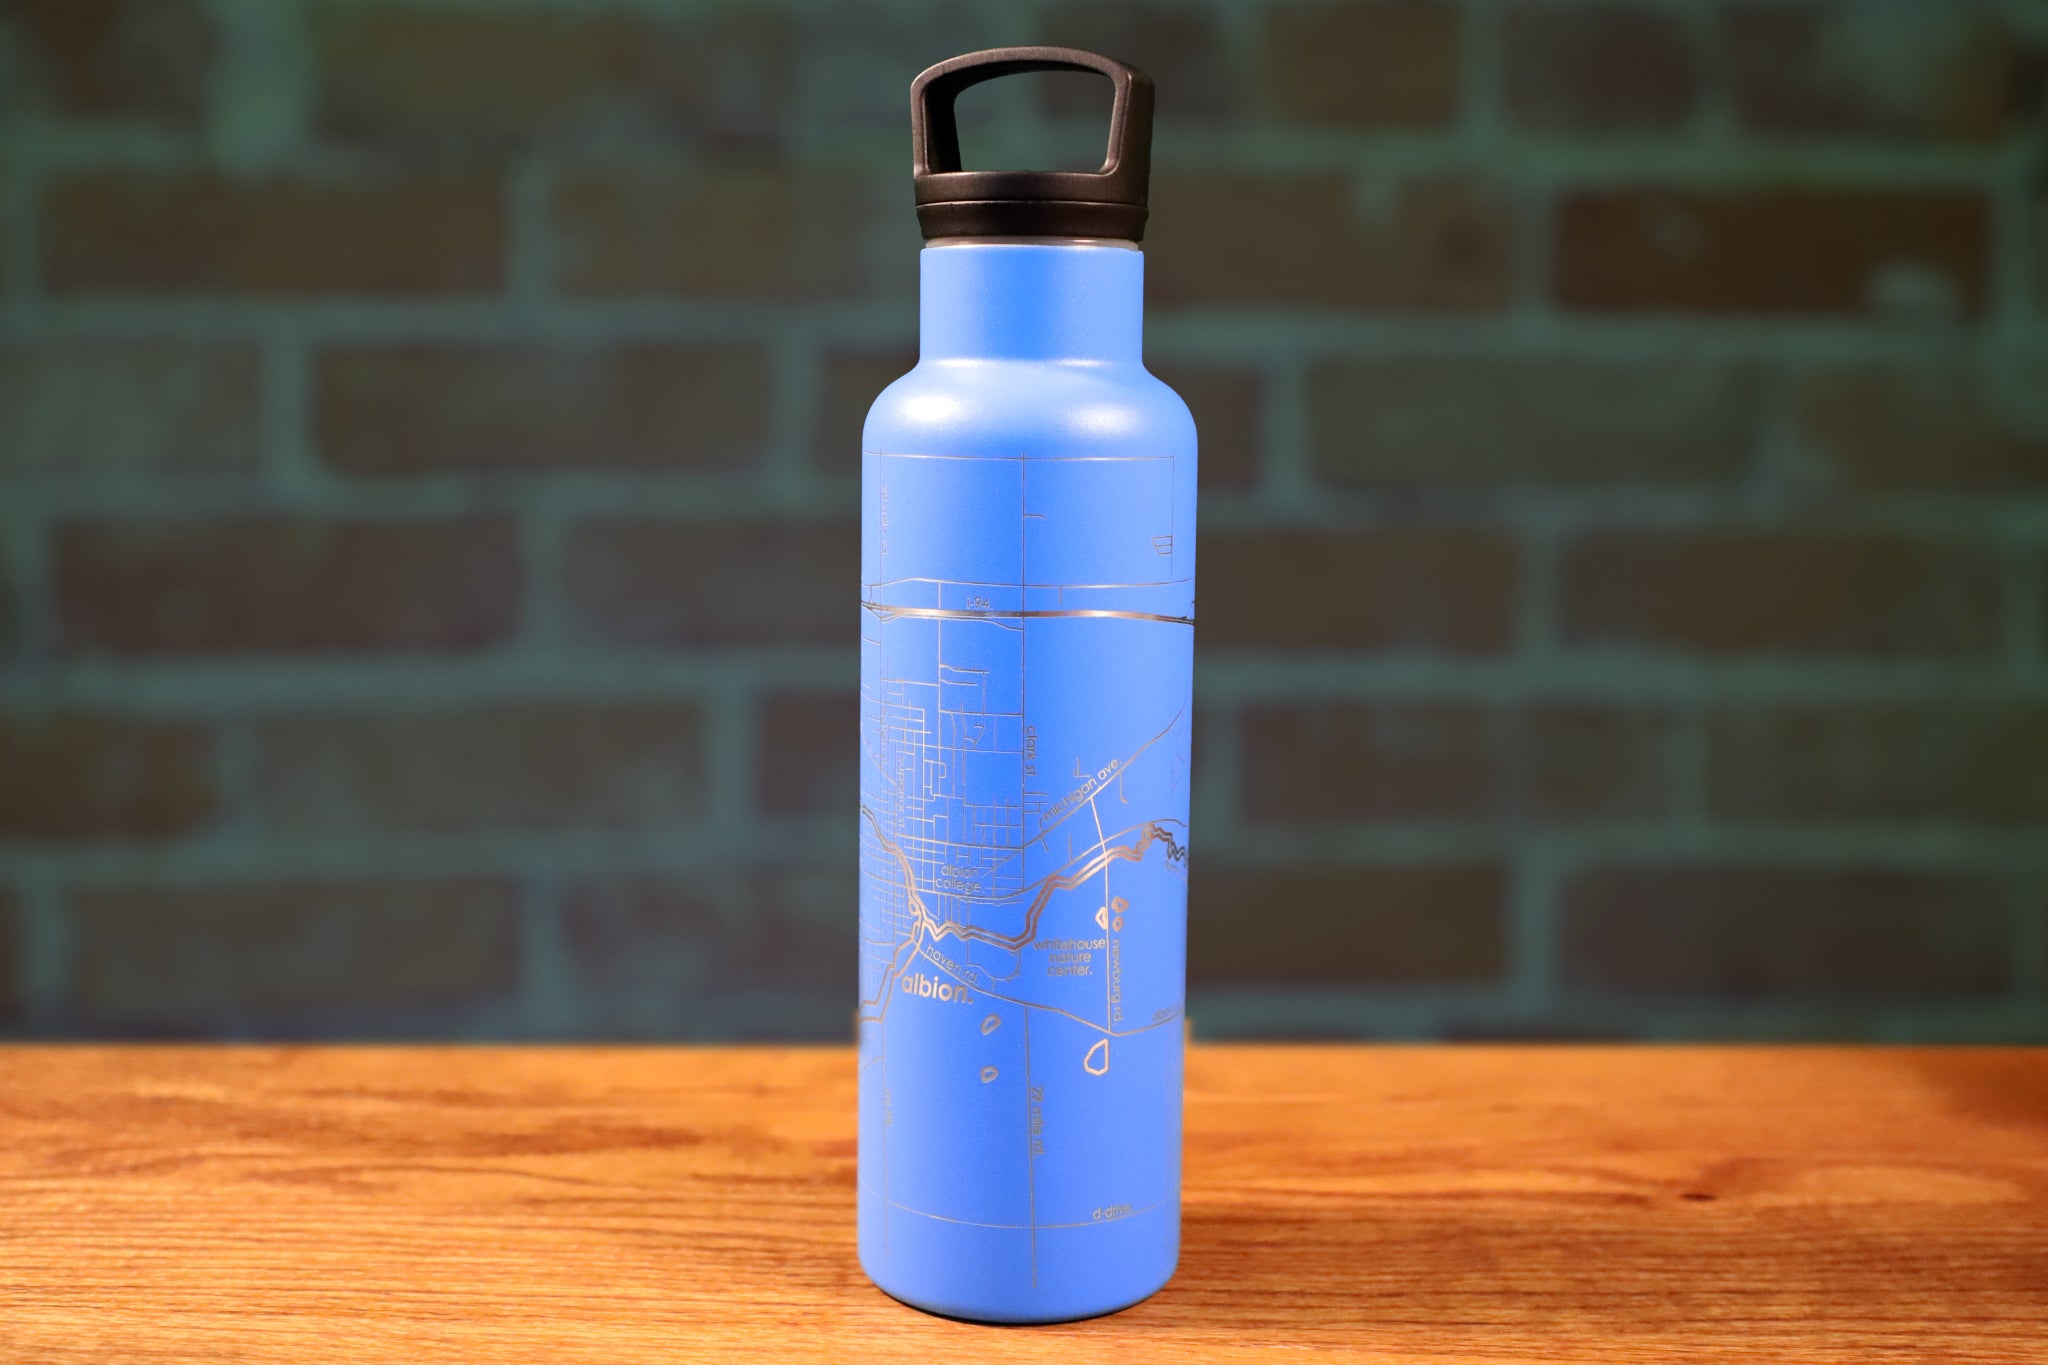 Albion Map Insulated Hydration Bottle